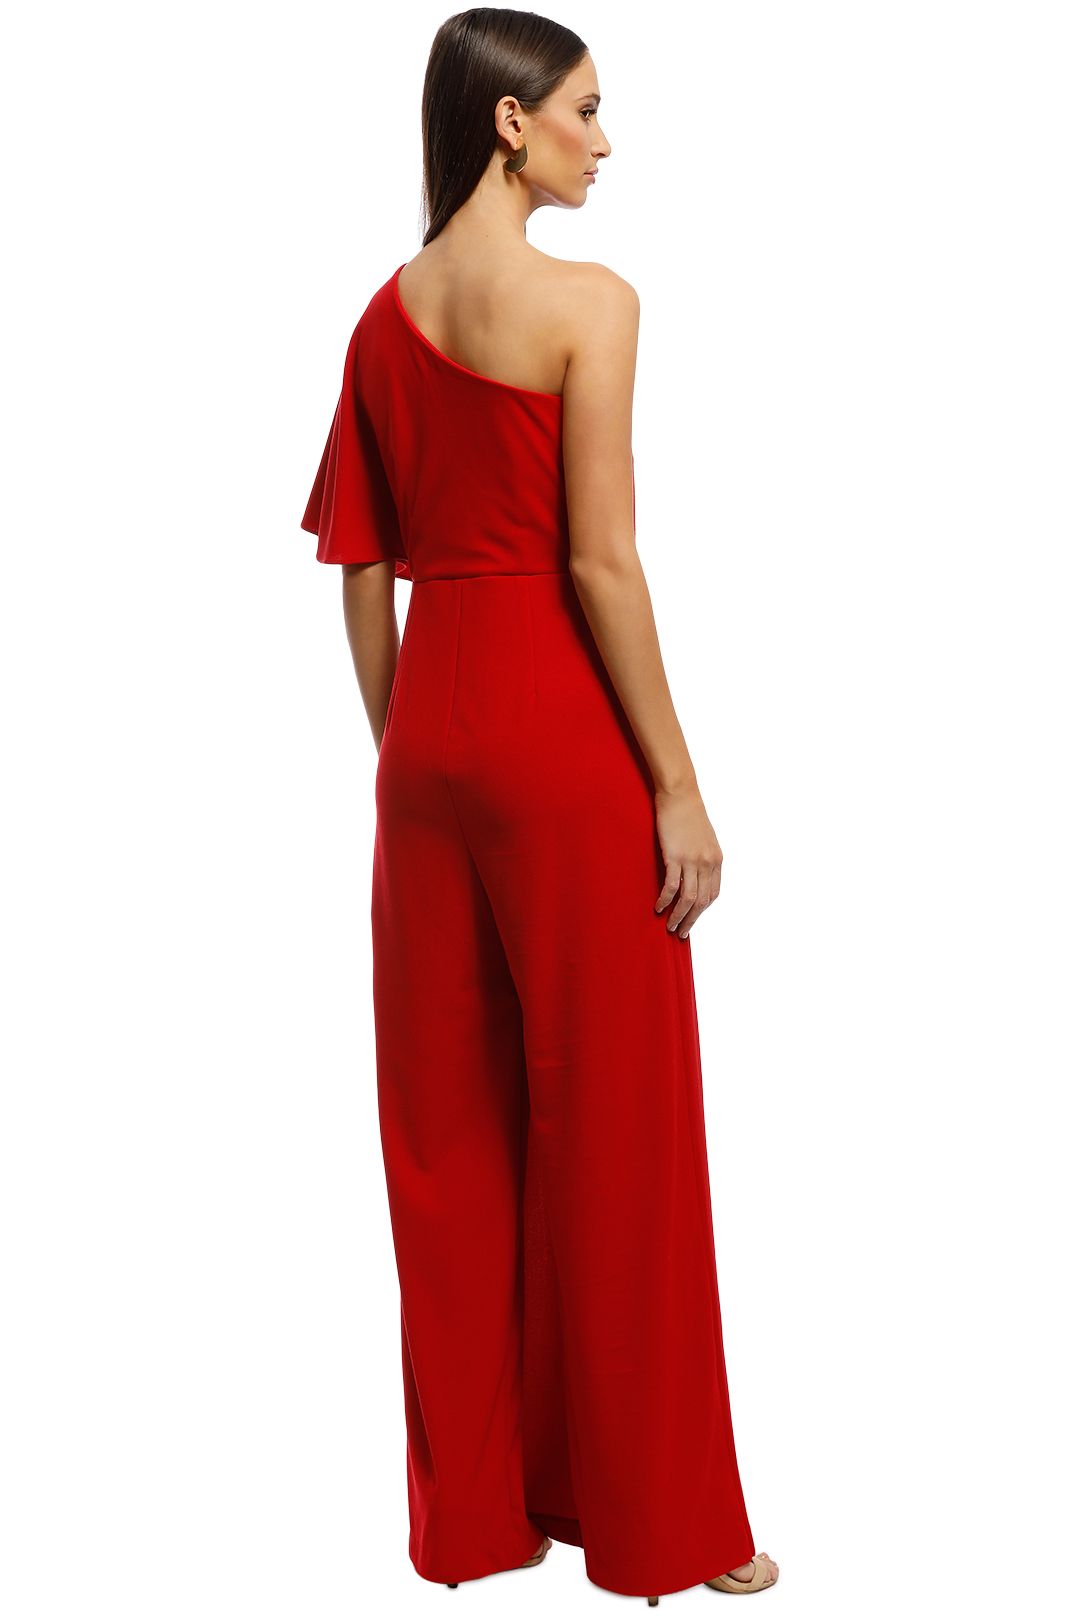 Harper Jumpsuit - Red by Montique for Hire